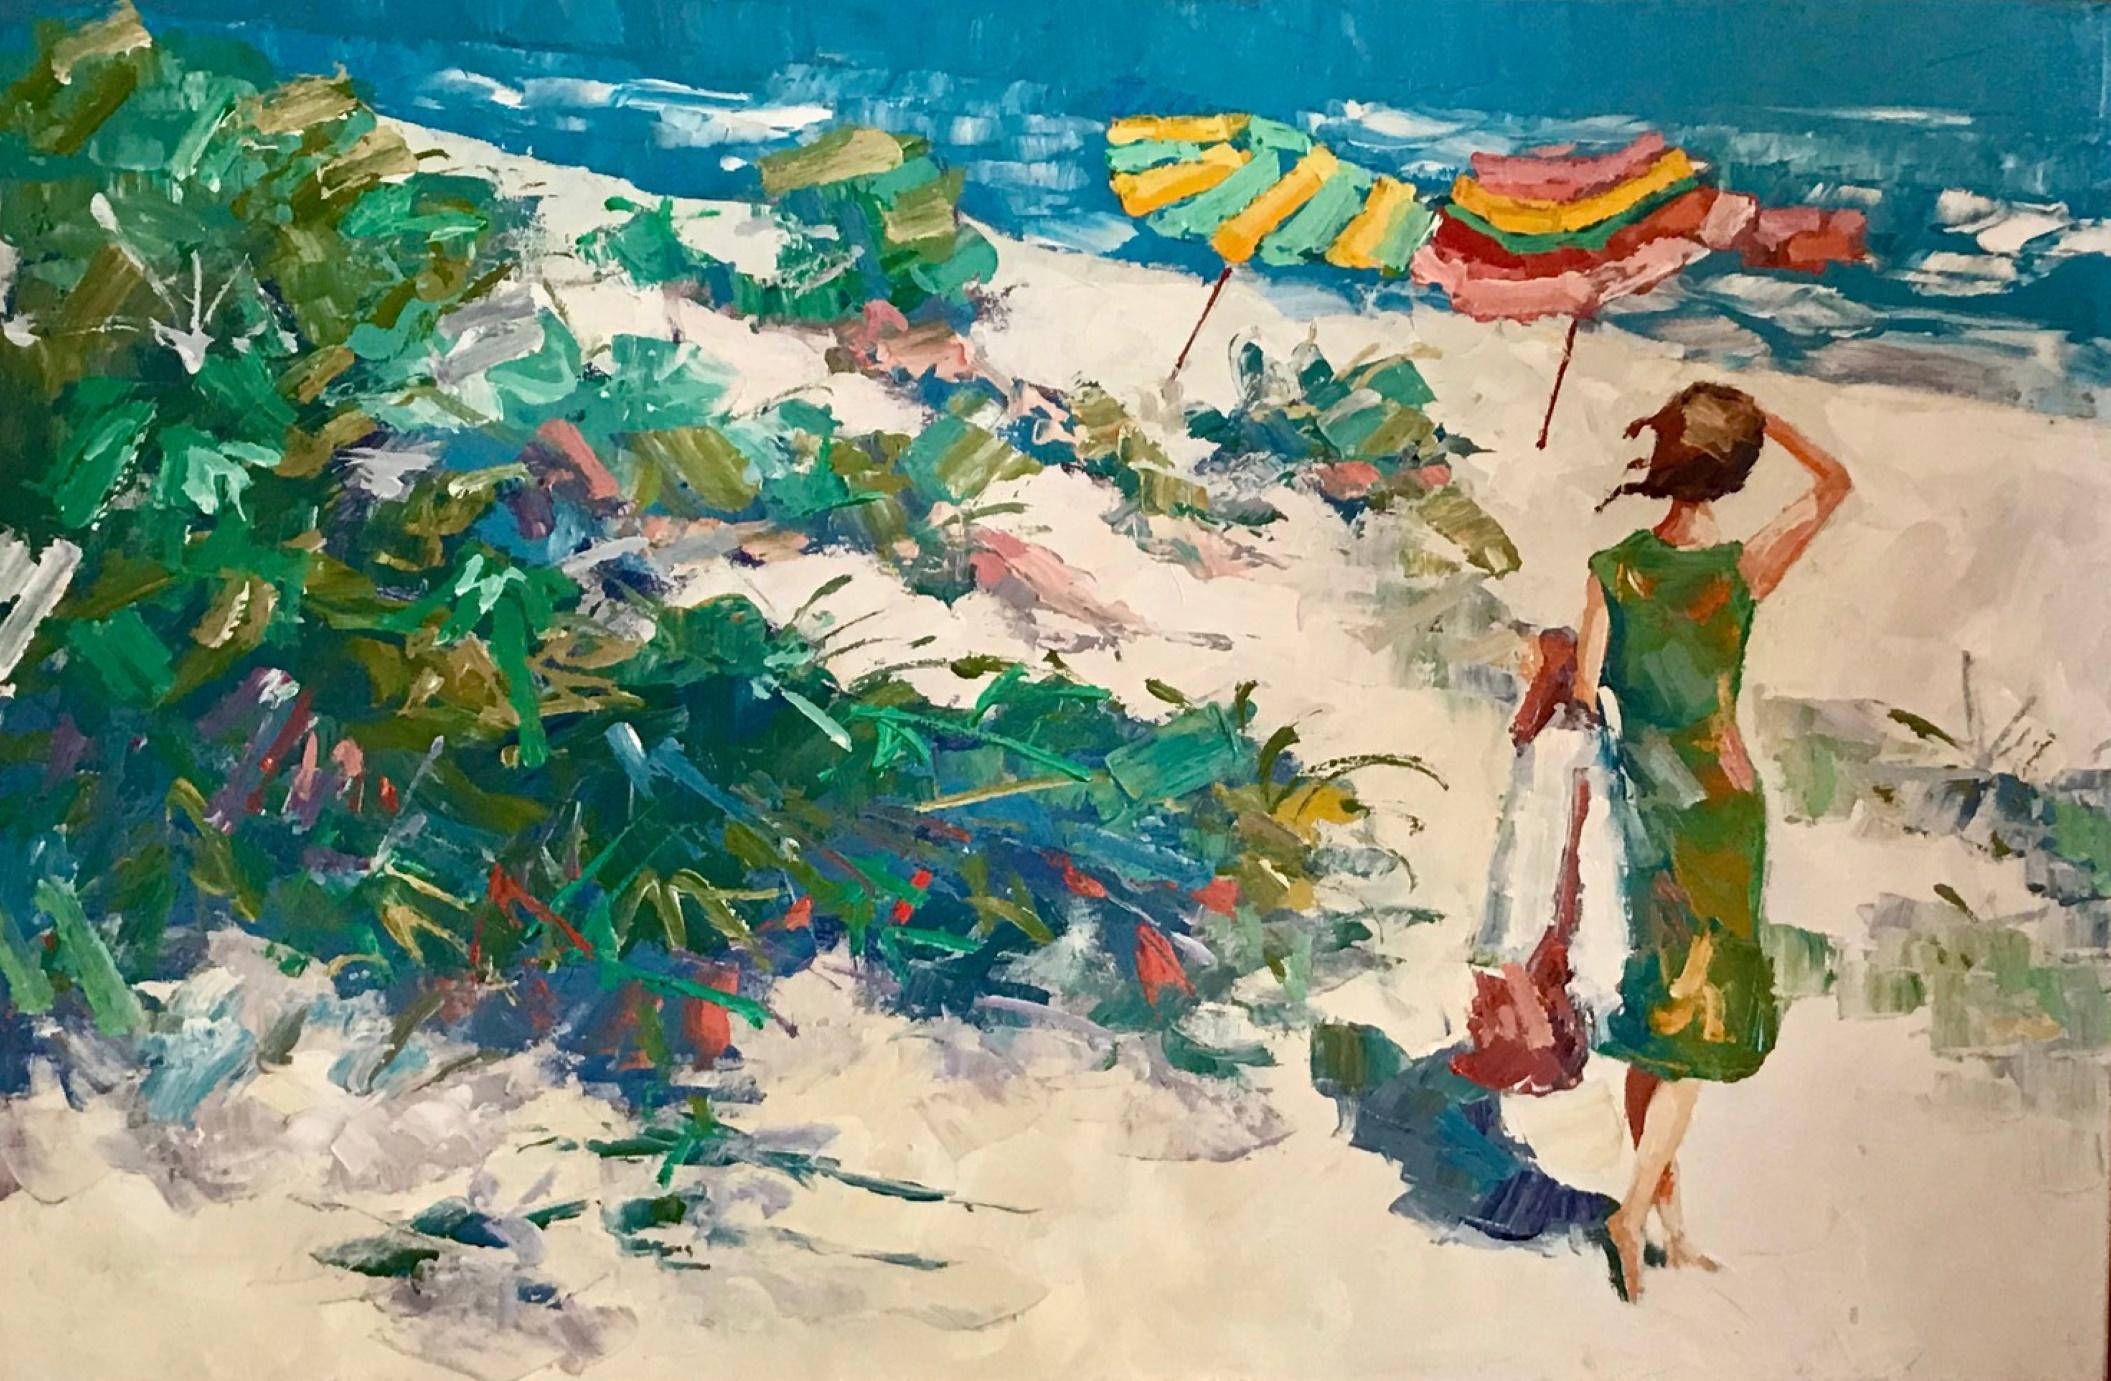 Nicola Simbari after oil painting of figure in Mediterranean landscape.

This oil painting on canvas board in post-impressionistic style depicts a female figure in a sunny Mediterranean landscape. The painting is signed, numbered and titled,